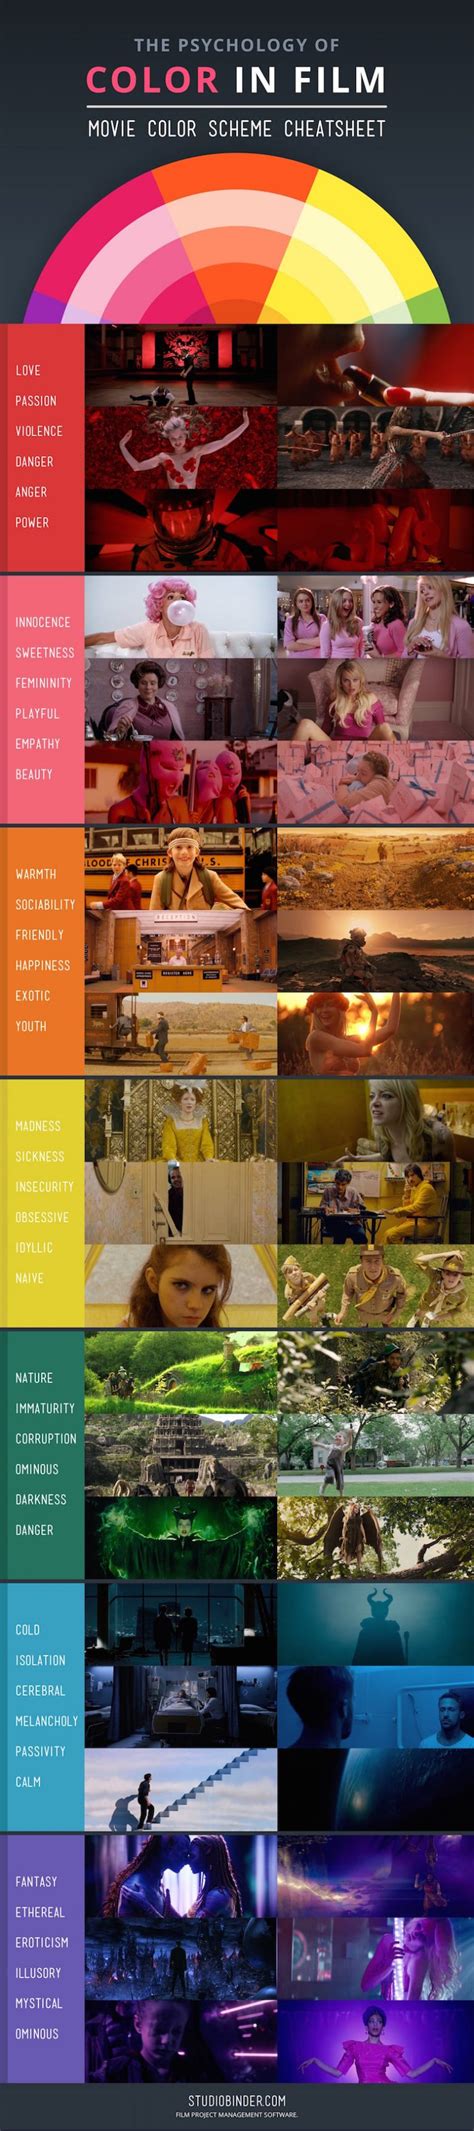 How Filmmakers Use Colors To Set The Mood Of A Film